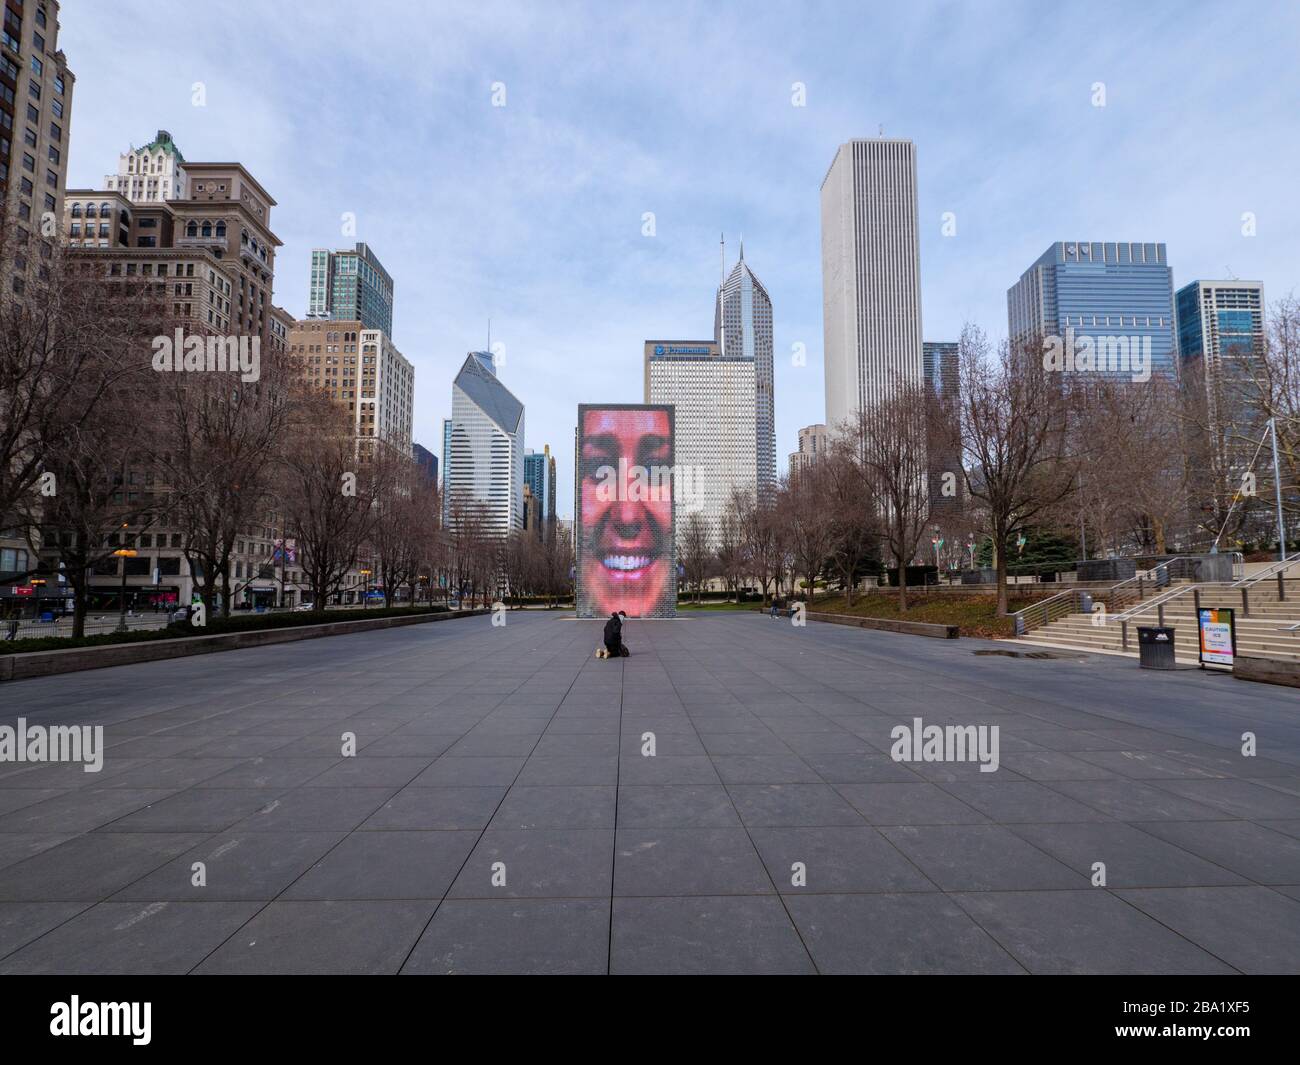 Chicago, Illinois, USA. 24th March 2020. Crown Fountain in Millennium Park, which usually attracts many people is mostly empty today do to the stay at home order in effect. Stock Photo